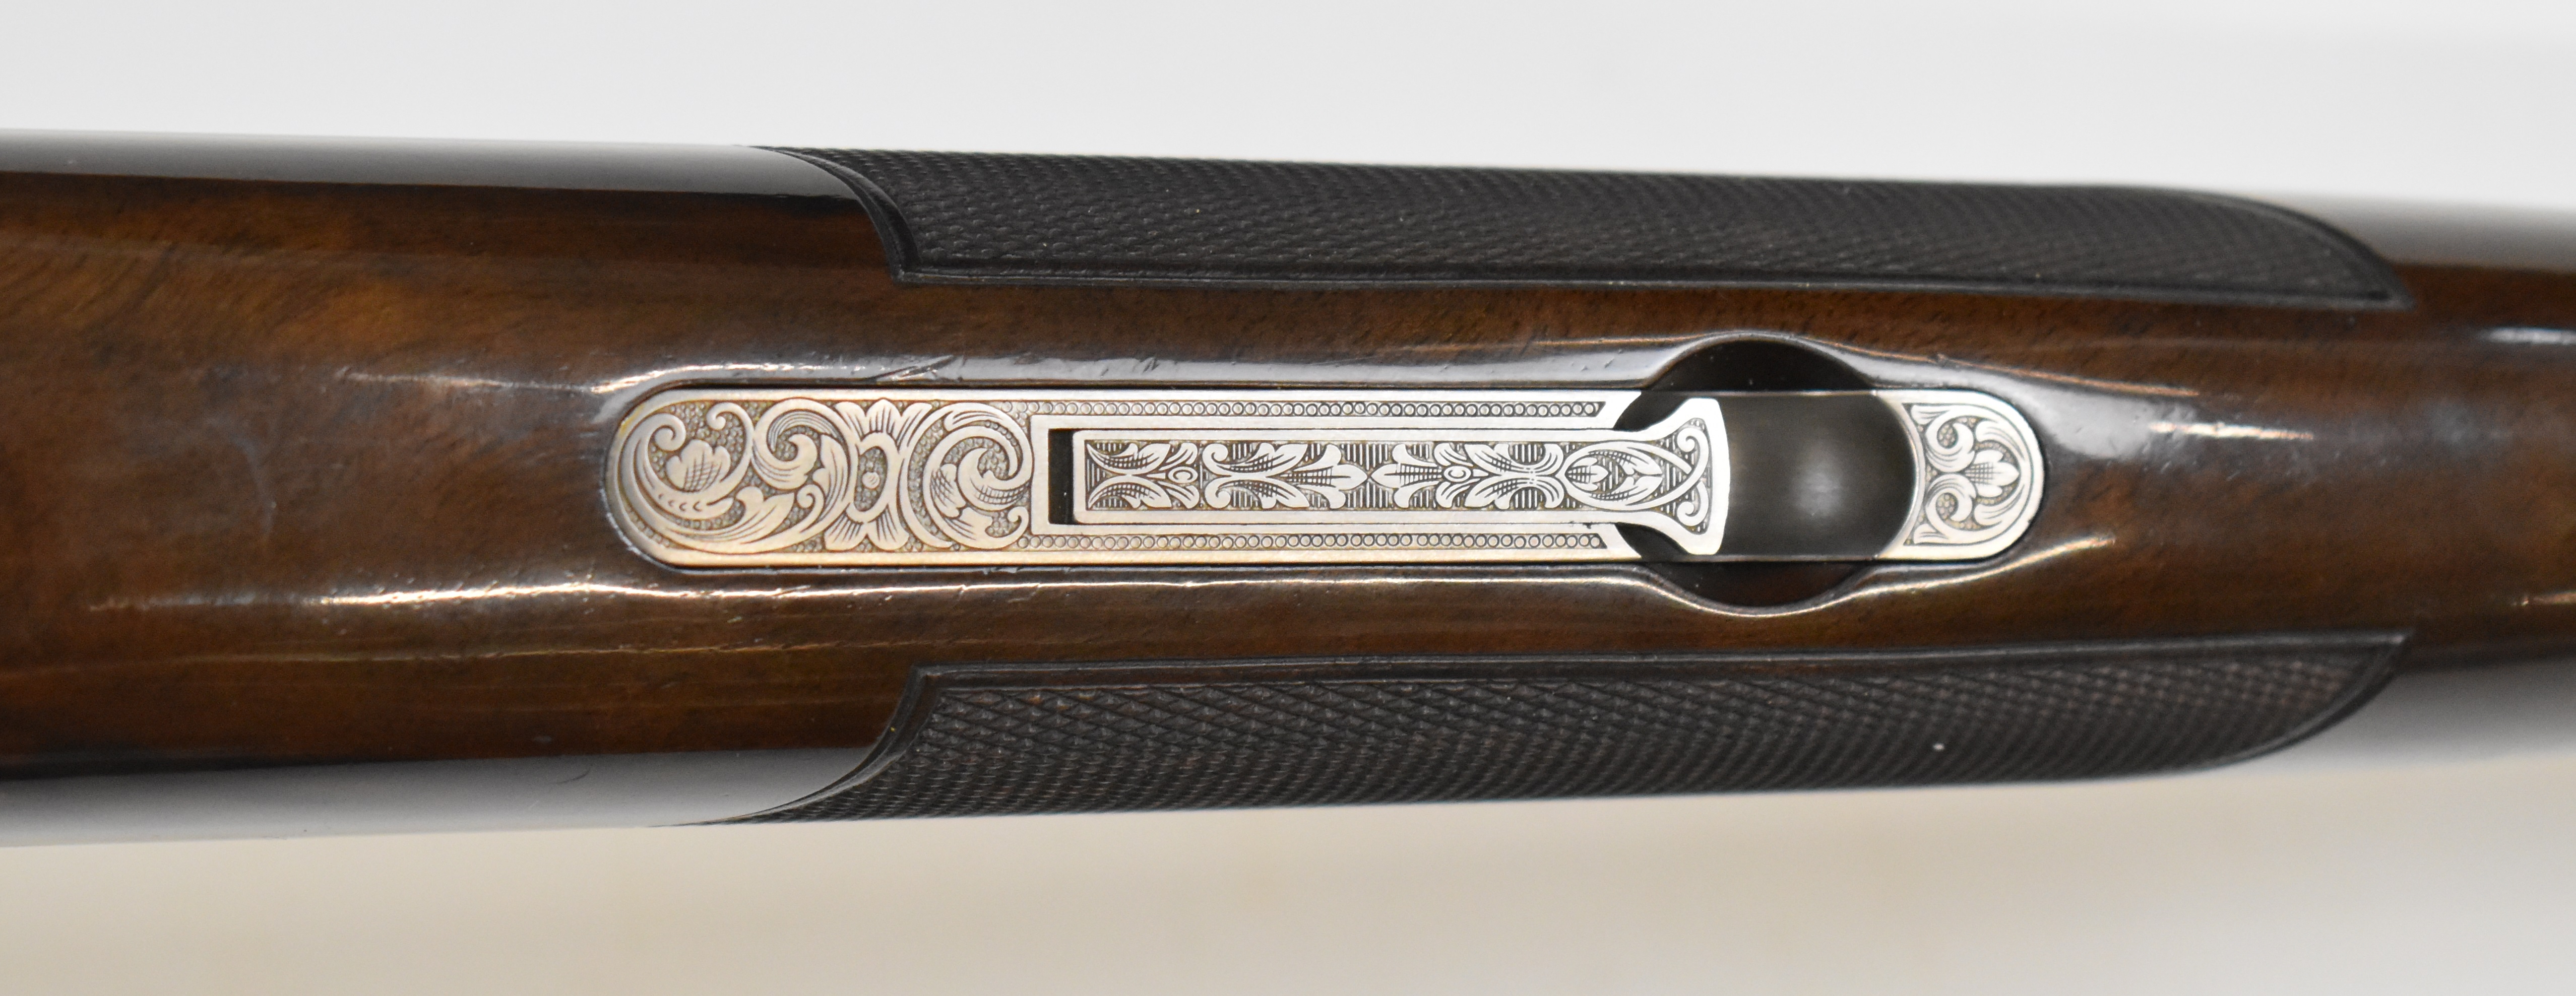 Browning B525 Ultimate 12 bore over and under ejector shotgun with gold engraving of birds - Image 8 of 12